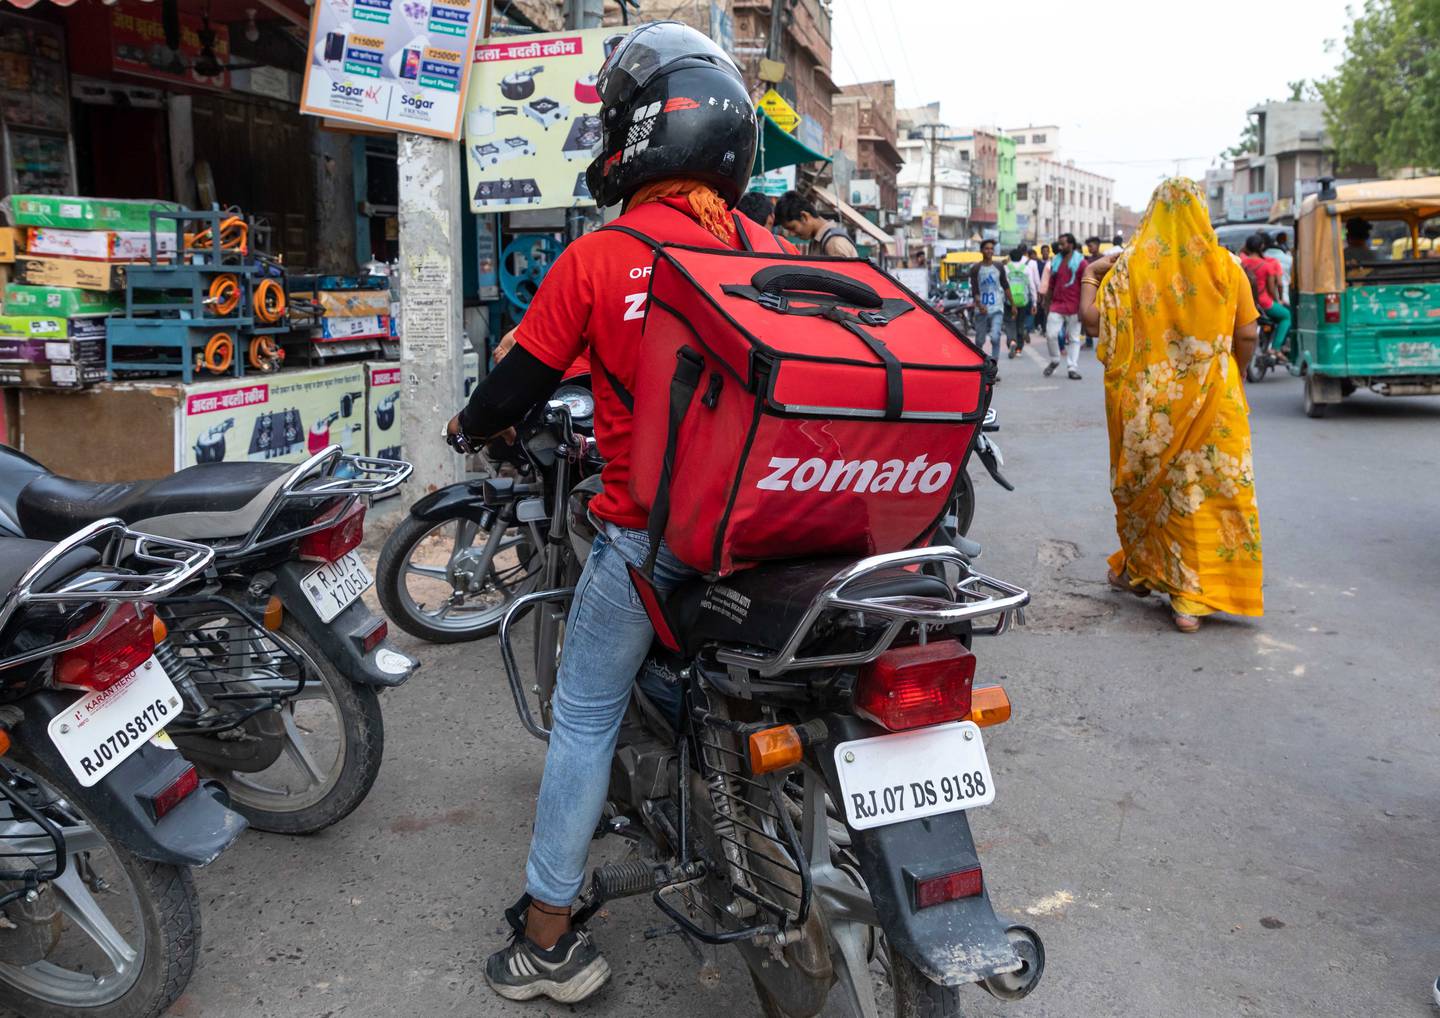 BIKANER, INDIA - JULY 25: A biker from the popular take away food delivery company Zomato, Rajasthan, Bikaner, India on July 25, 2019 in Bikaner, India. (Photo by Eric Lafforgue/Art in All of Us/Corbis via Getty Images)